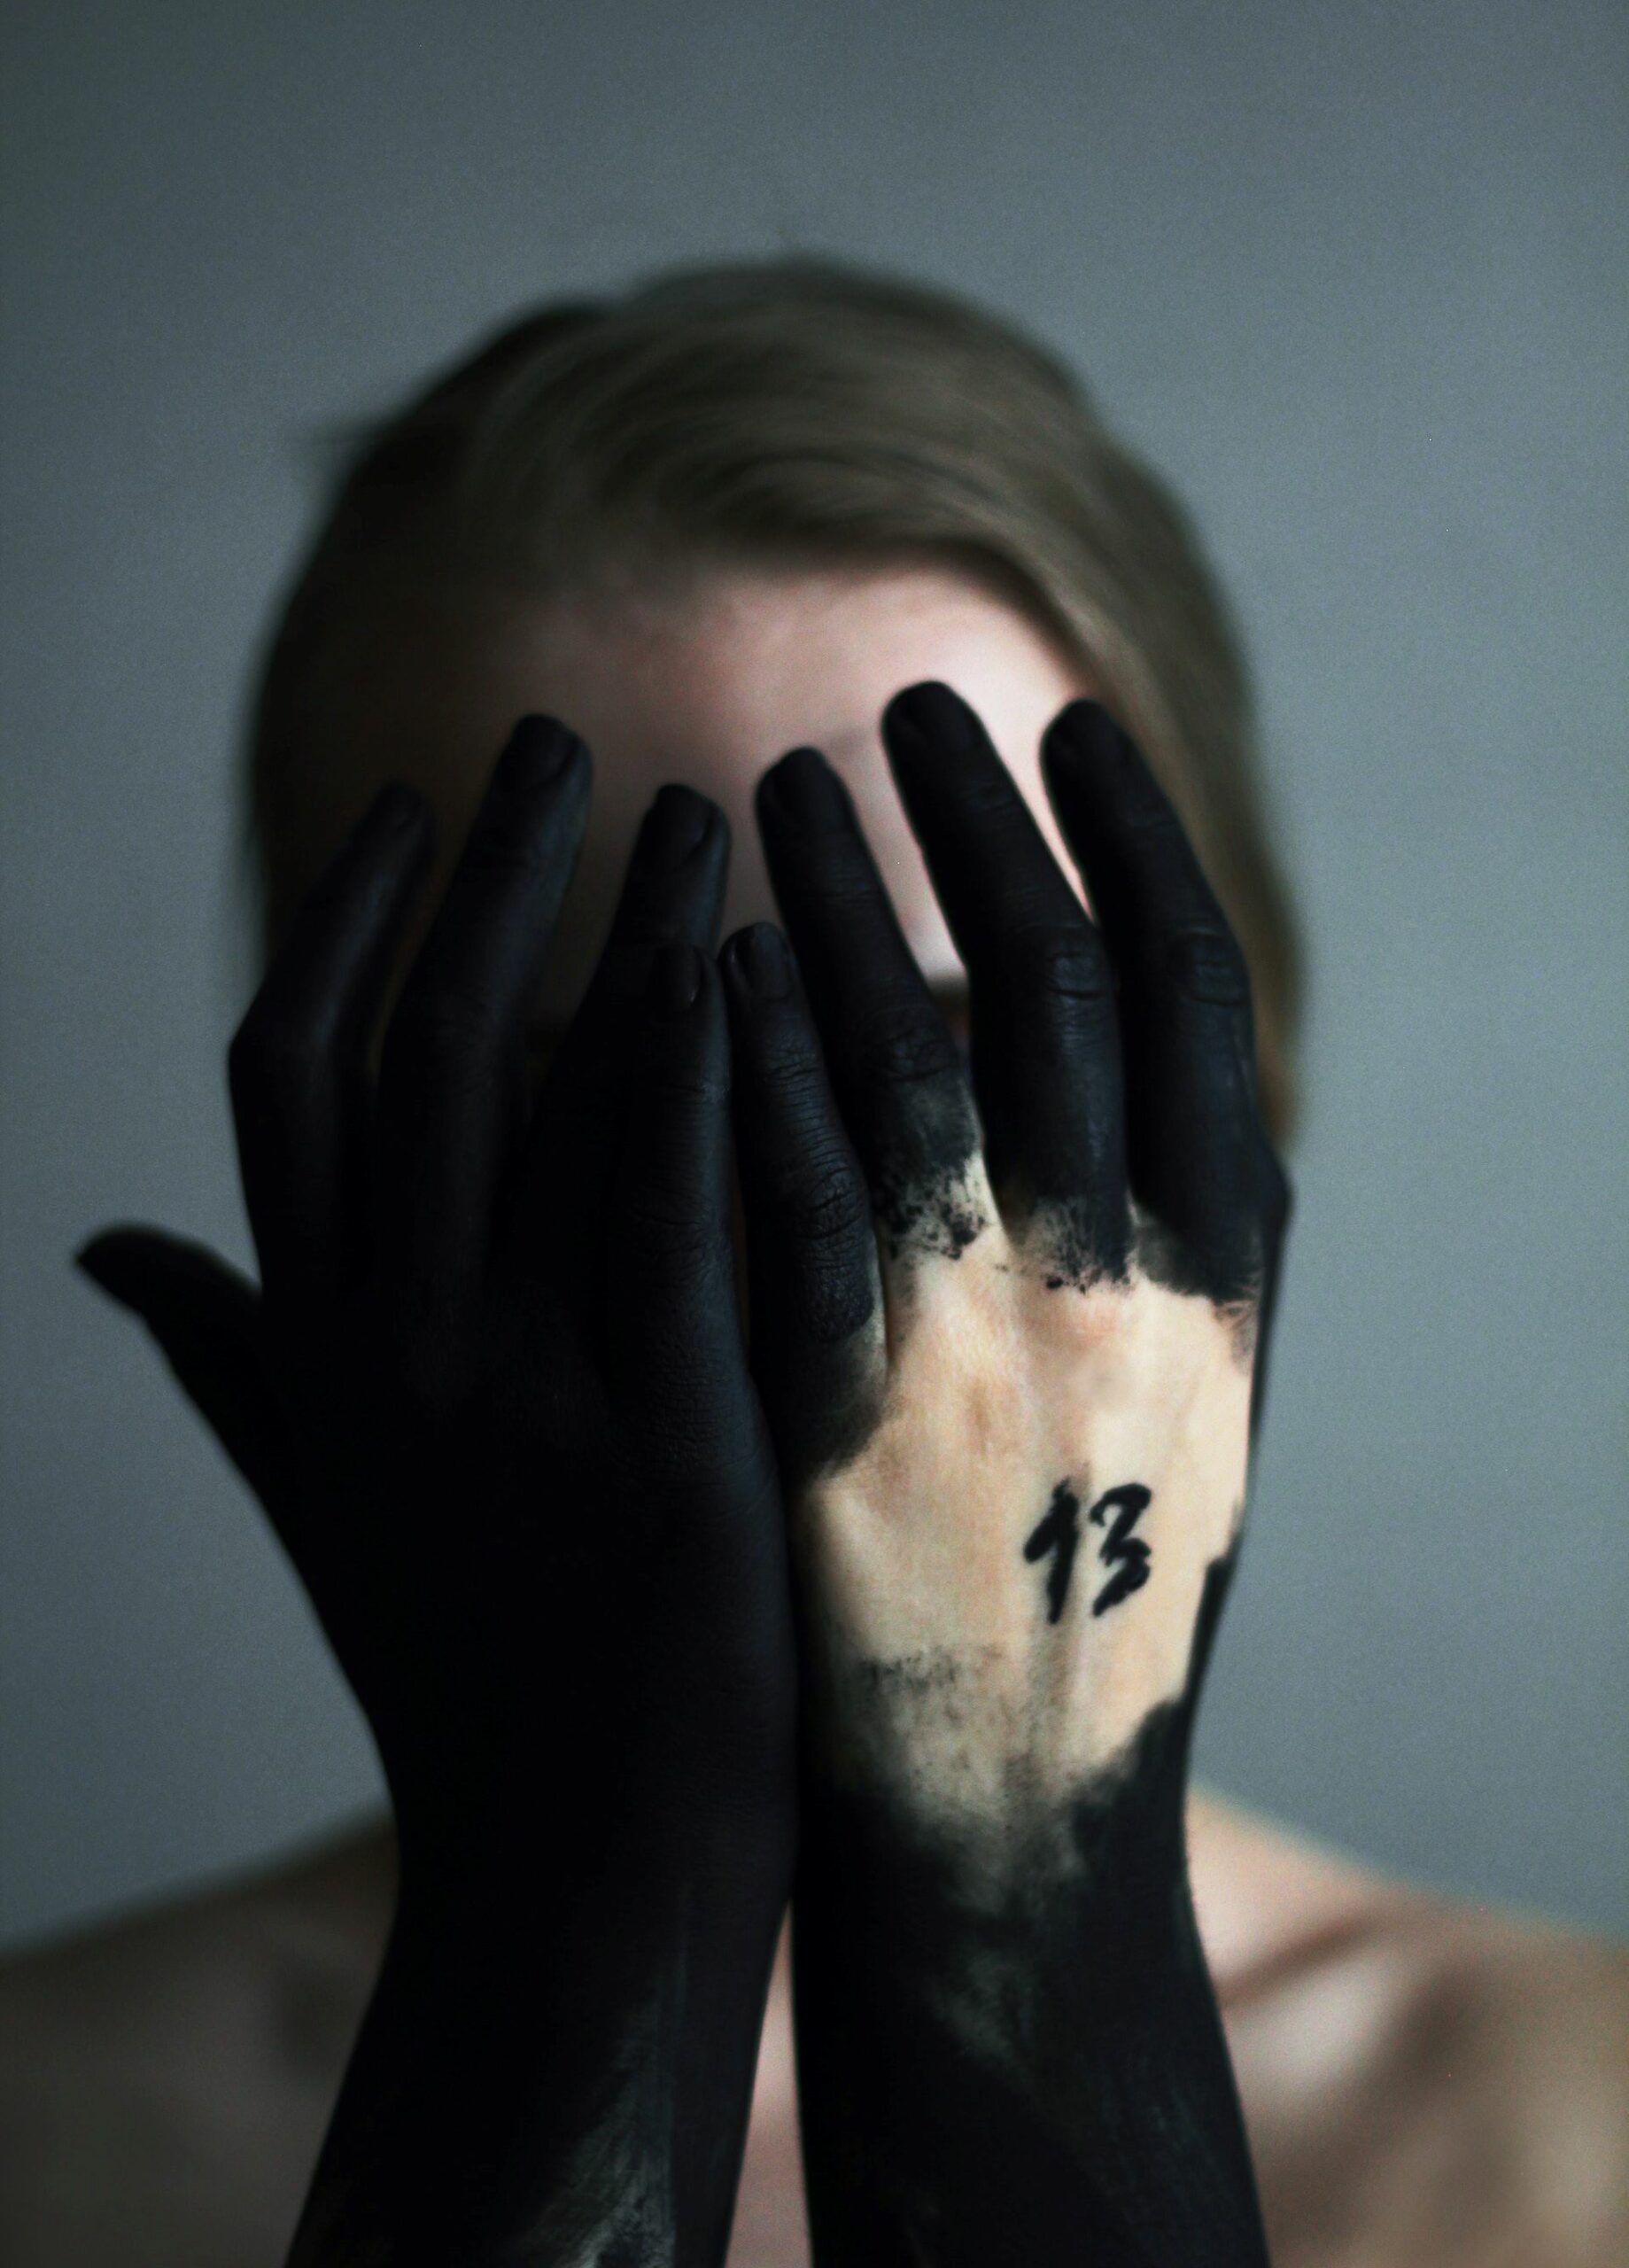 An image of a person with the number 13 on their hands which are hiding their face. 